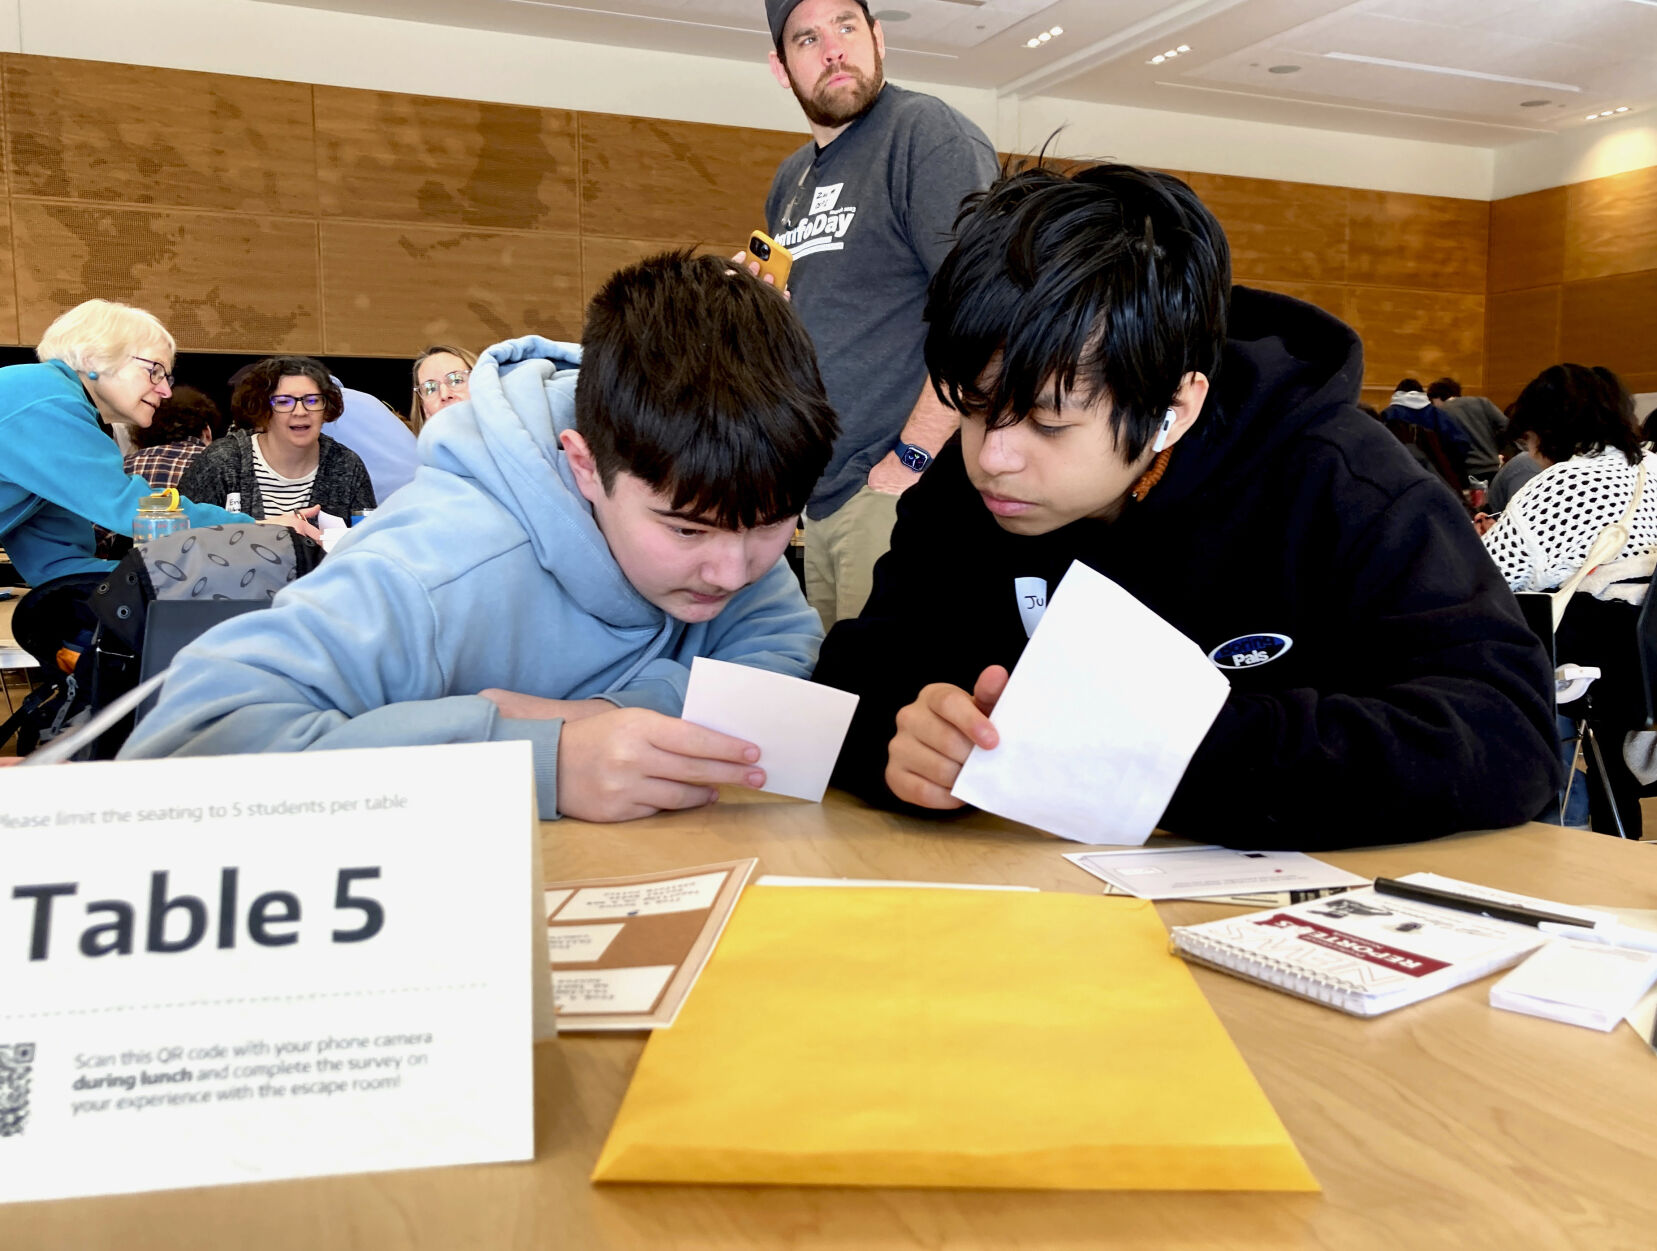 <p>Meadowdale High School 9th grade students Juanangel Avila, right, and Legacy Marshall, left, work together to solve an exercise at MisinfoDay, an event hosted by the University of Washington to help high school students identify and avoid misinformation, Tuesday, March 14, 2023, in Seattle. Educators around the country are pushing for greater digital media literacy education. (AP Photo/Manuel Valdes)</p>   PHOTO CREDIT: Manuel Valdes - staff, AP